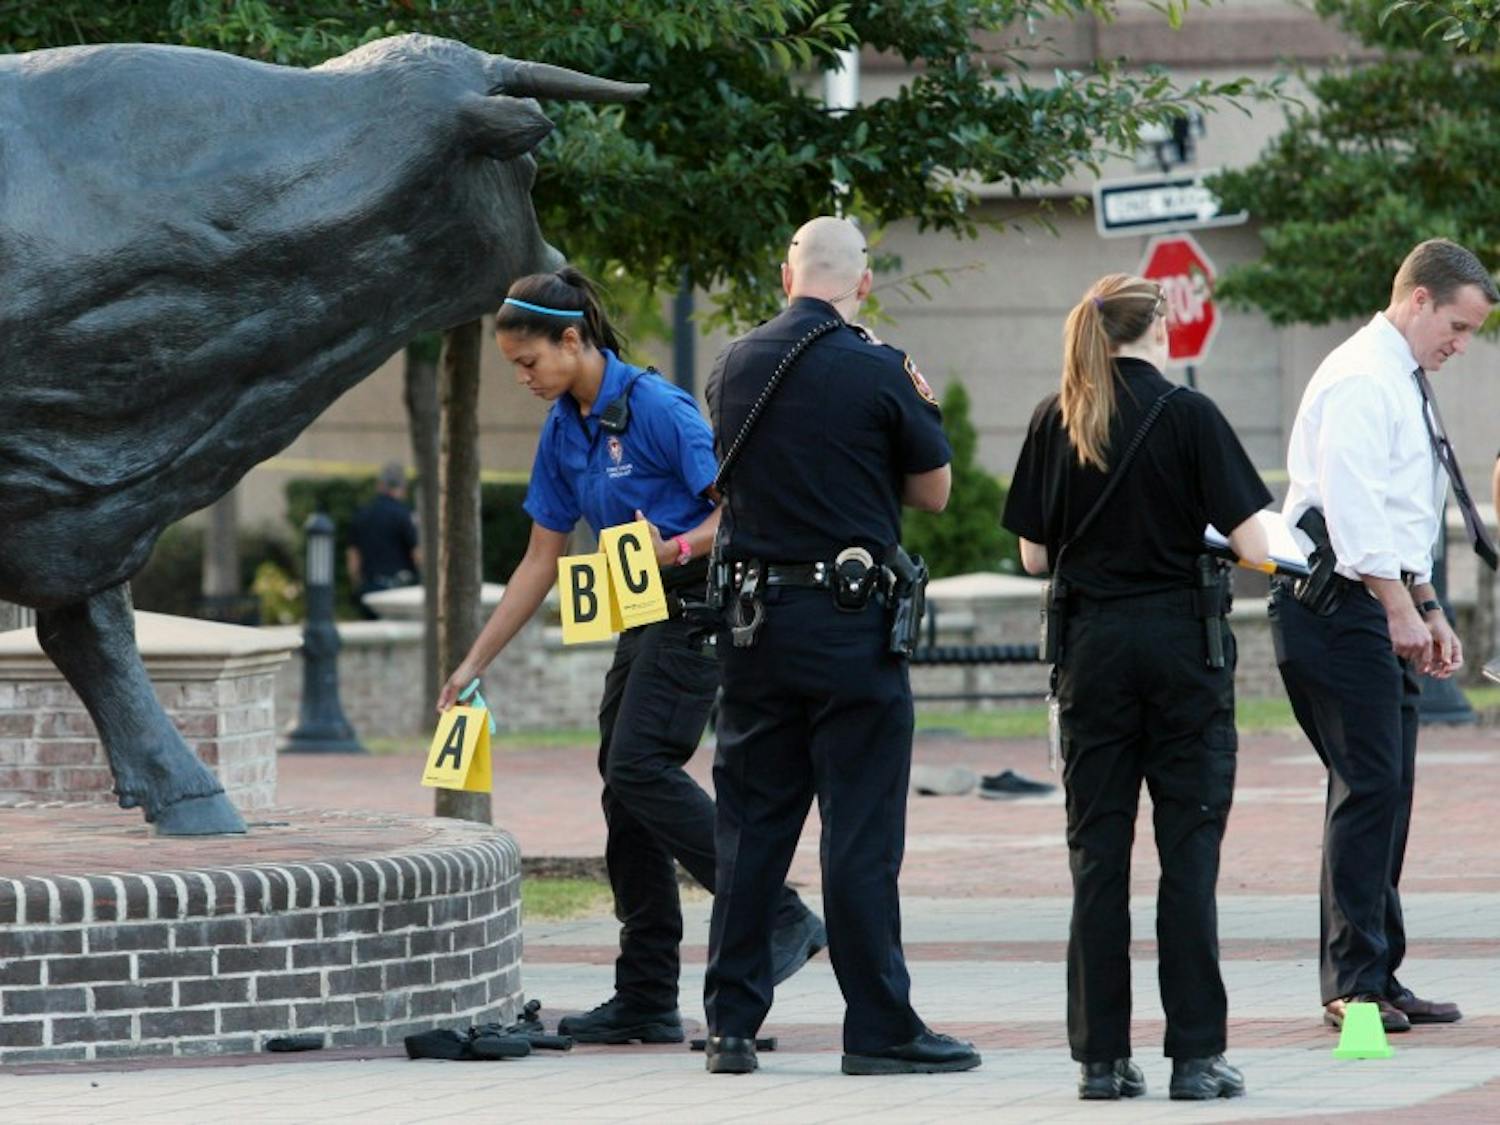 A crime scene investigator marks evidence at the site of the shooting.